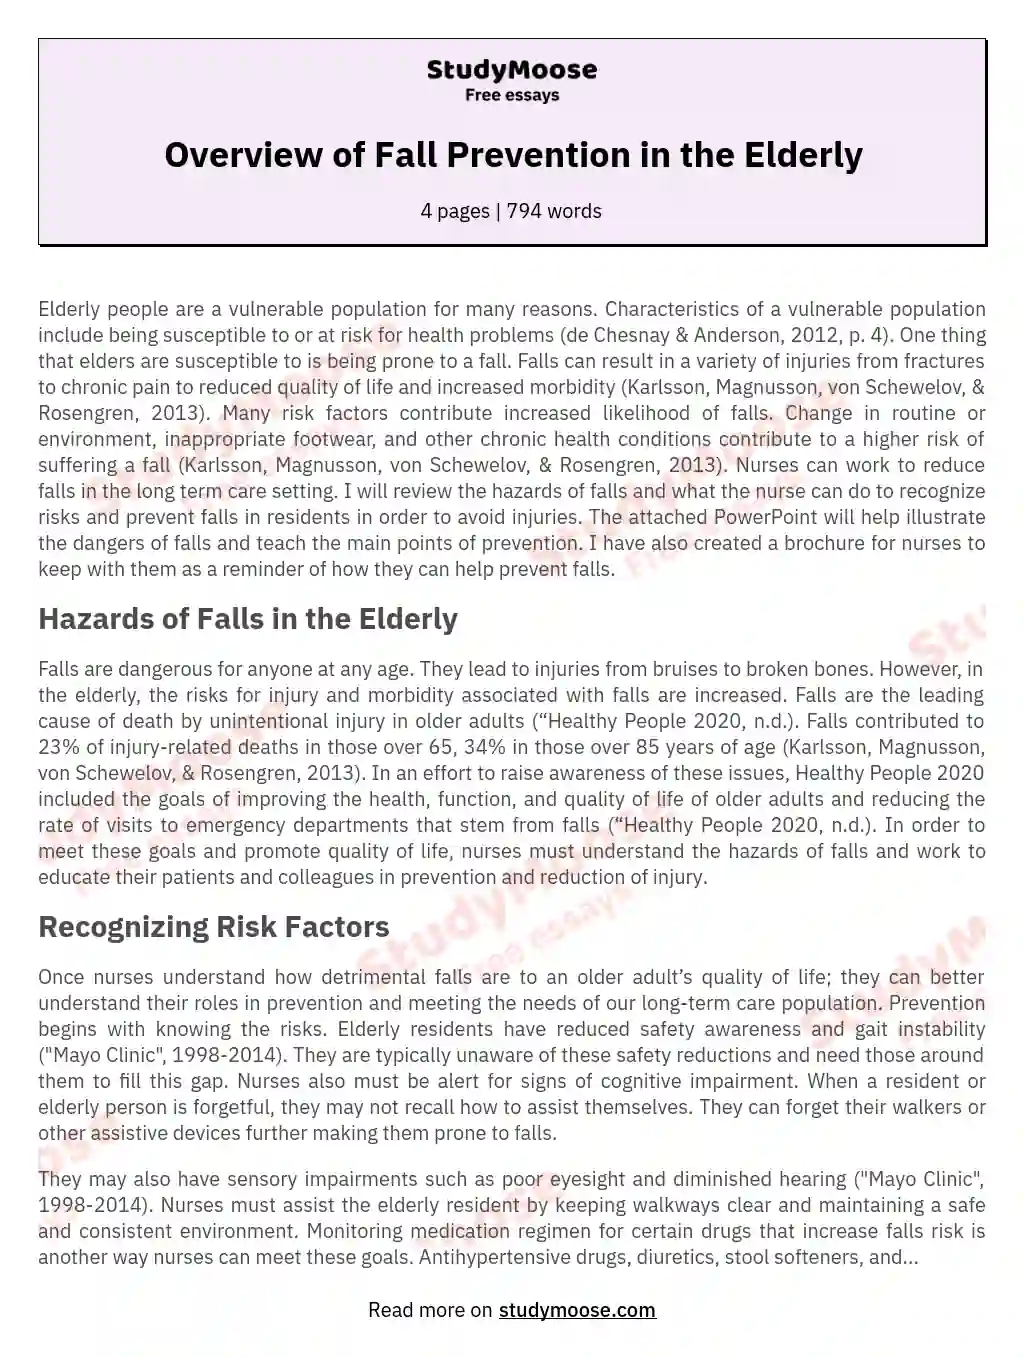 Overview of Fall Prevention in the Elderly essay